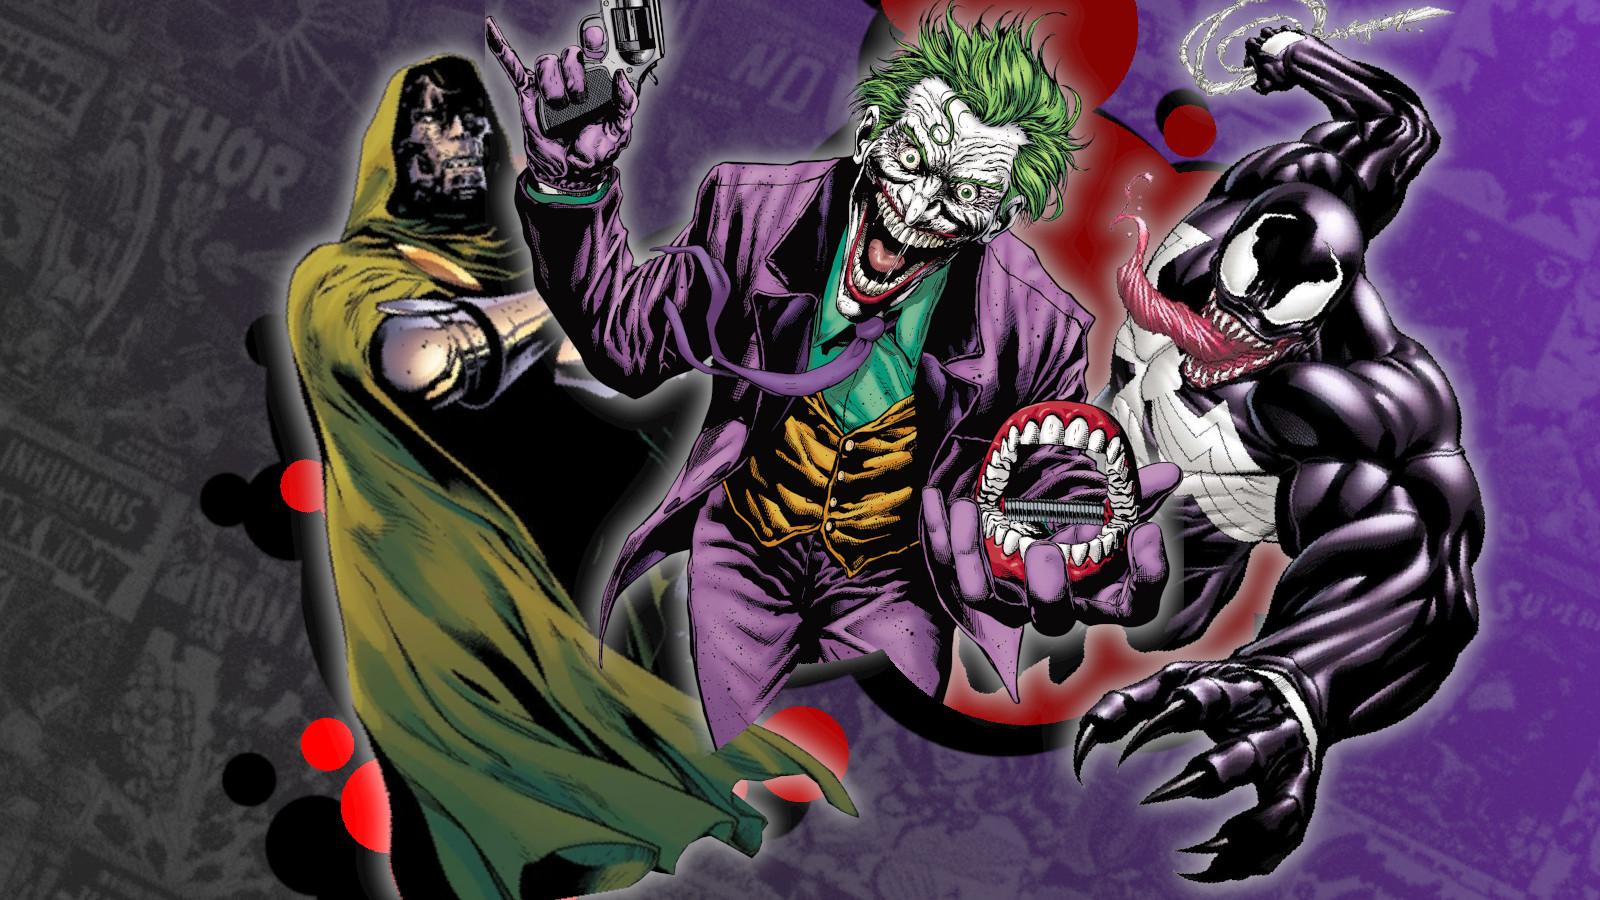 Dr Doom, Joker, and Venom lead our coverage of supervillain games we want to play